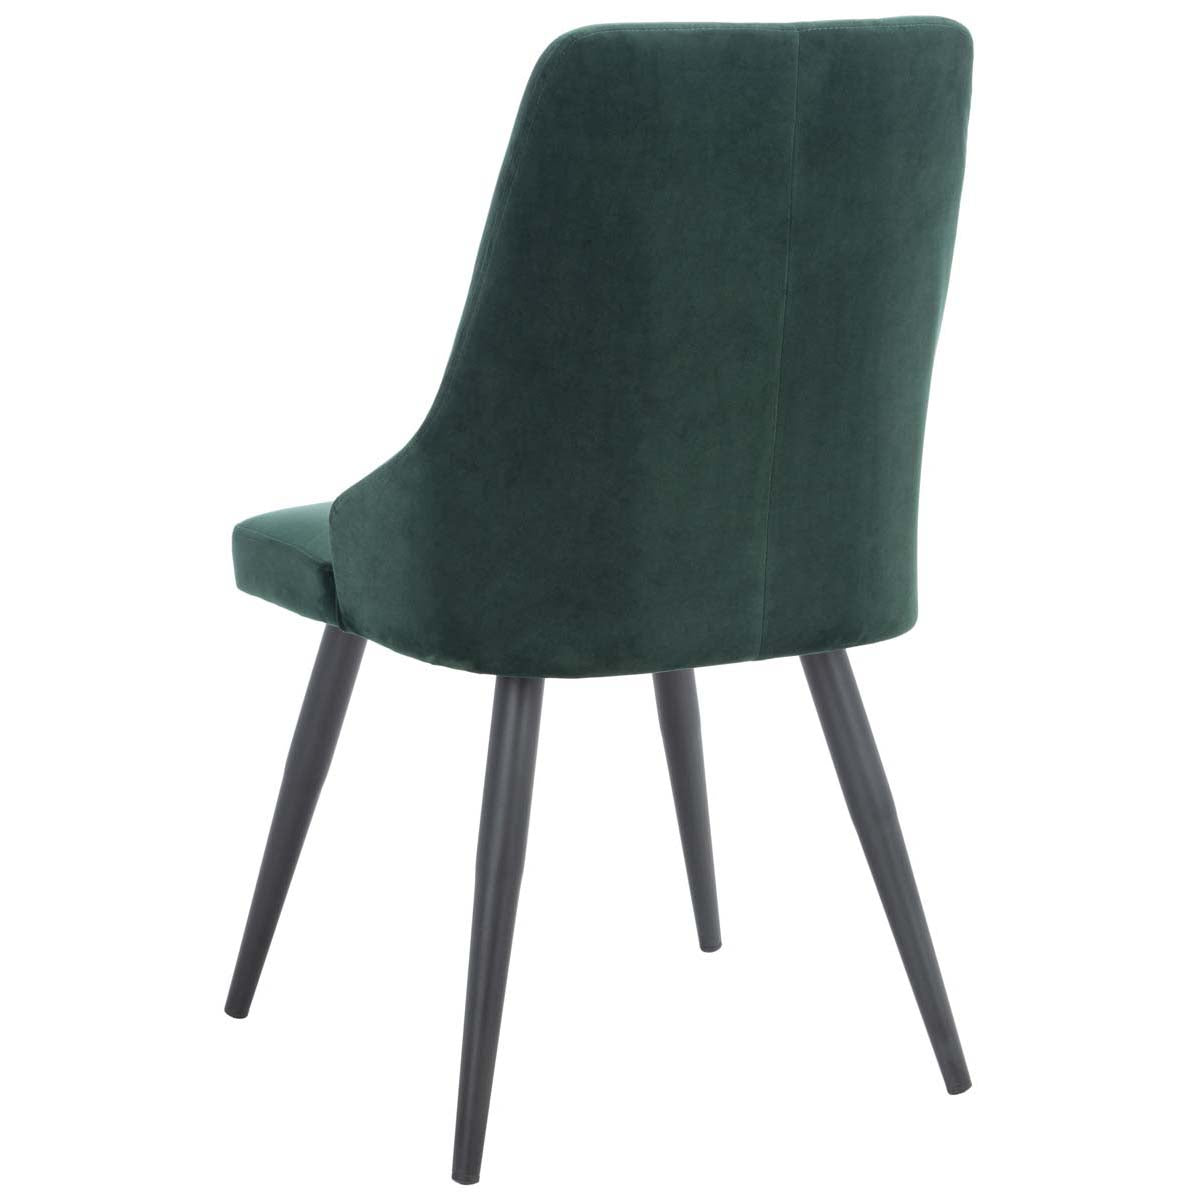 Safavieh Zoi Upholstered Dining Chair , DCH7500